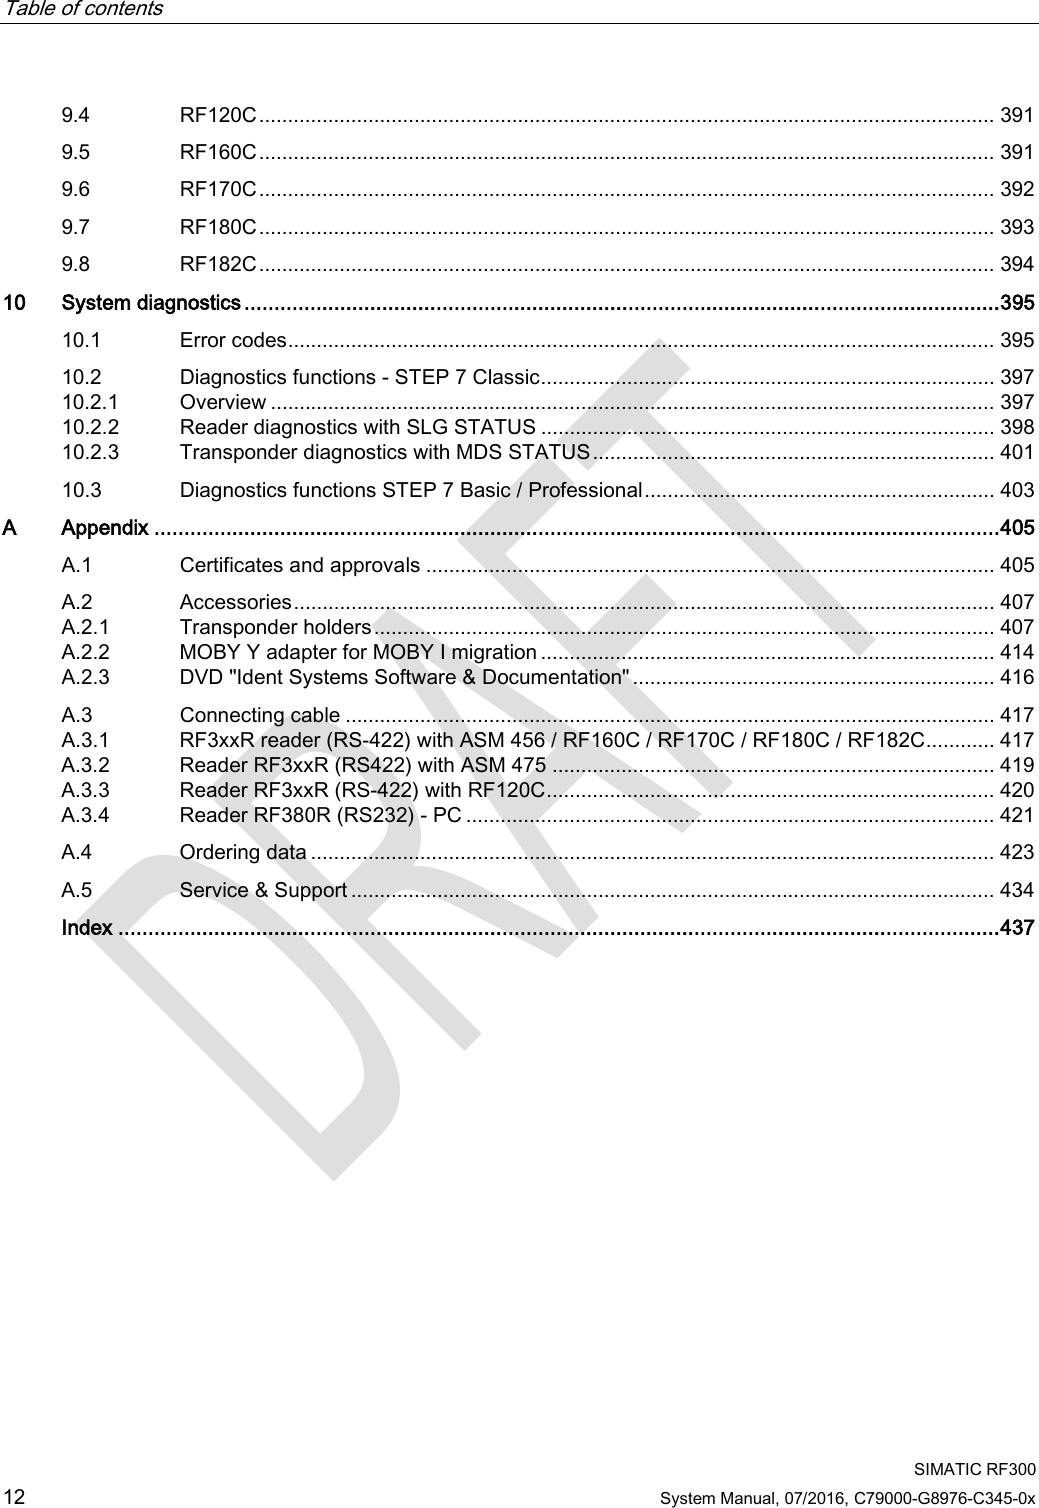 Table of contents     SIMATIC RF300 12 System Manual, 07/2016, C79000-G8976-C345-0x 9.4 RF120C ................................................................................................................................ 391 9.5 RF160C ................................................................................................................................ 391 9.6 RF170C ................................................................................................................................ 392 9.7 RF180C ................................................................................................................................ 393 9.8 RF182C ................................................................................................................................ 394 10 System diagnostics .............................................................................................................................. 395 10.1 Error codes ........................................................................................................................... 395 10.2 Diagnostics functions - STEP 7 Classic ............................................................................... 397 10.2.1 Overview .............................................................................................................................. 397 10.2.2 Reader diagnostics with SLG STATUS ............................................................................... 398 10.2.3 Transponder diagnostics with MDS STATUS ...................................................................... 401 10.3 Diagnostics functions STEP 7 Basic / Professional ............................................................. 403 A  Appendix ............................................................................................................................................. 405 A.1 Certificates and approvals ................................................................................................... 405 A.2 Accessories .......................................................................................................................... 407 A.2.1 Transponder holders ............................................................................................................ 407 A.2.2 MOBY Y adapter for MOBY I migration ............................................................................... 414 A.2.3 DVD &quot;Ident Systems Software &amp; Documentation&quot; ............................................................... 416 A.3 Connecting cable ................................................................................................................. 417 A.3.1 RF3xxR reader (RS-422) with ASM 456 / RF160C / RF170C / RF180C / RF182C ............ 417 A.3.2 Reader RF3xxR (RS422) with ASM 475 ............................................................................. 419 A.3.3 Reader RF3xxR (RS-422) with RF120C .............................................................................. 420 A.3.4 Reader RF380R (RS232) - PC ............................................................................................ 421 A.4 Ordering data ....................................................................................................................... 423 A.5 Service &amp; Support ................................................................................................................ 434  Index ................................................................................................................................................... 437 